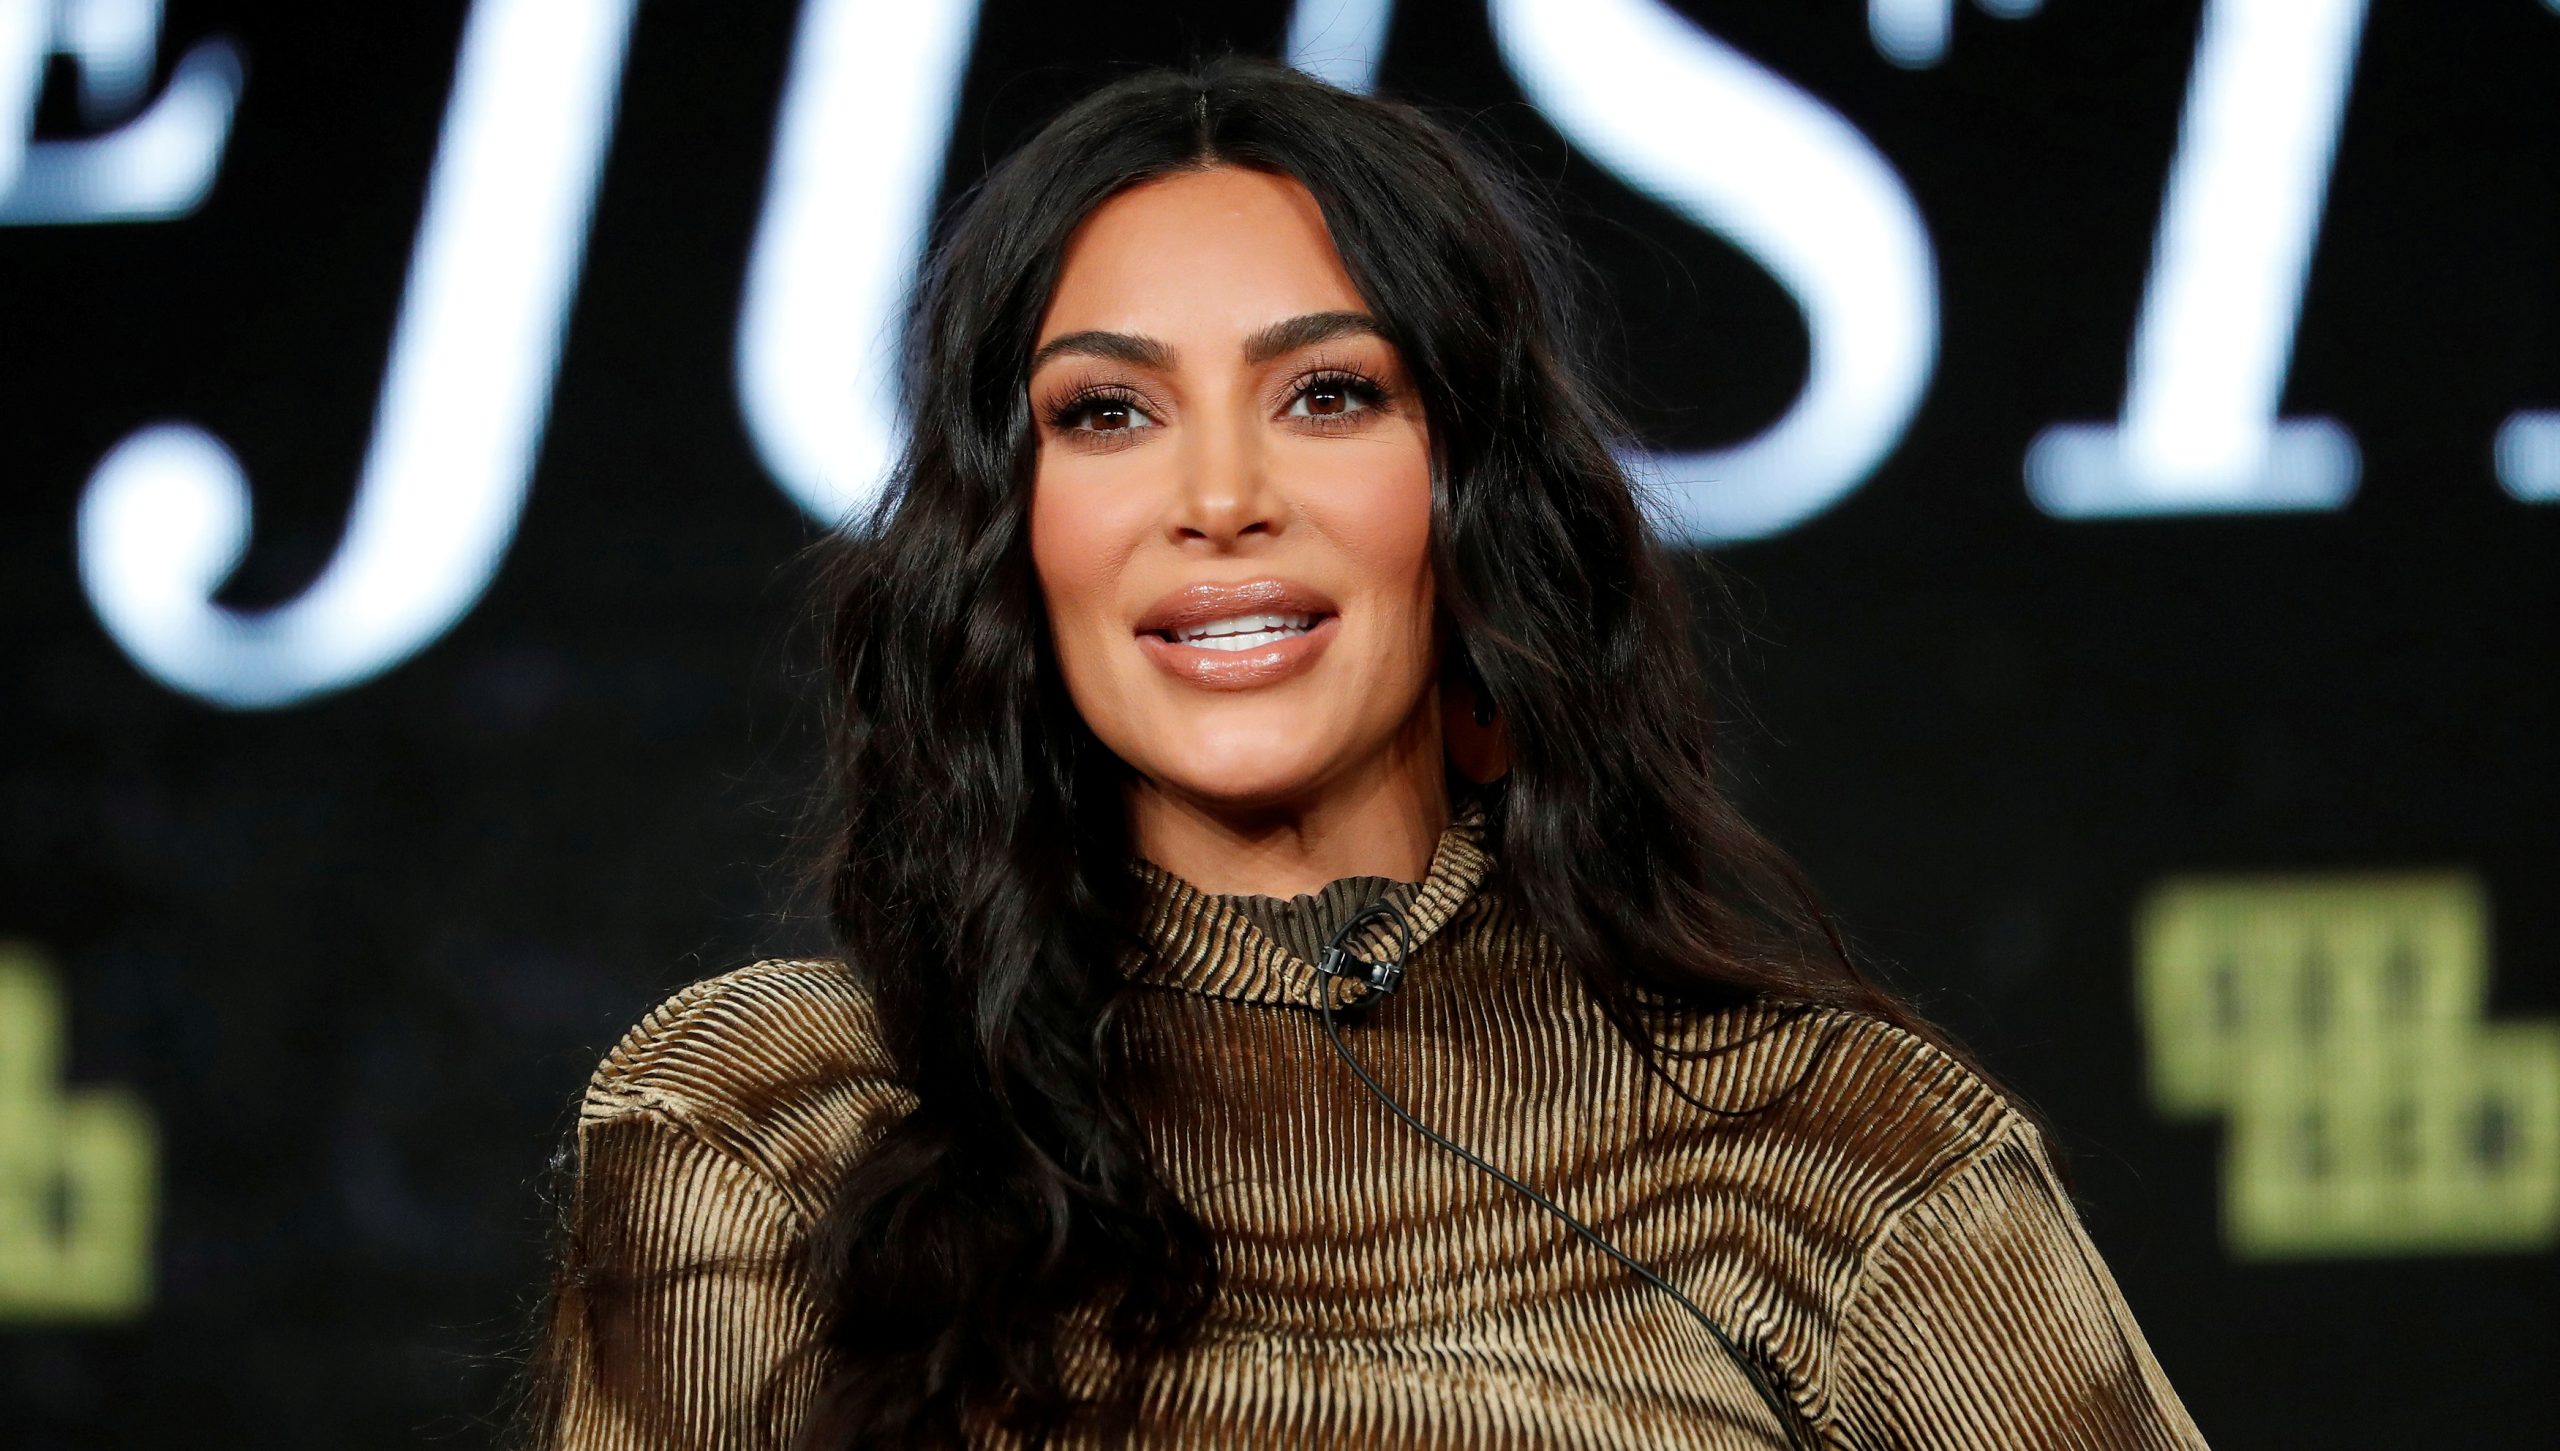 Who Is Kim Kardashian Dating 2021? Everything About Kim's Love Affairs